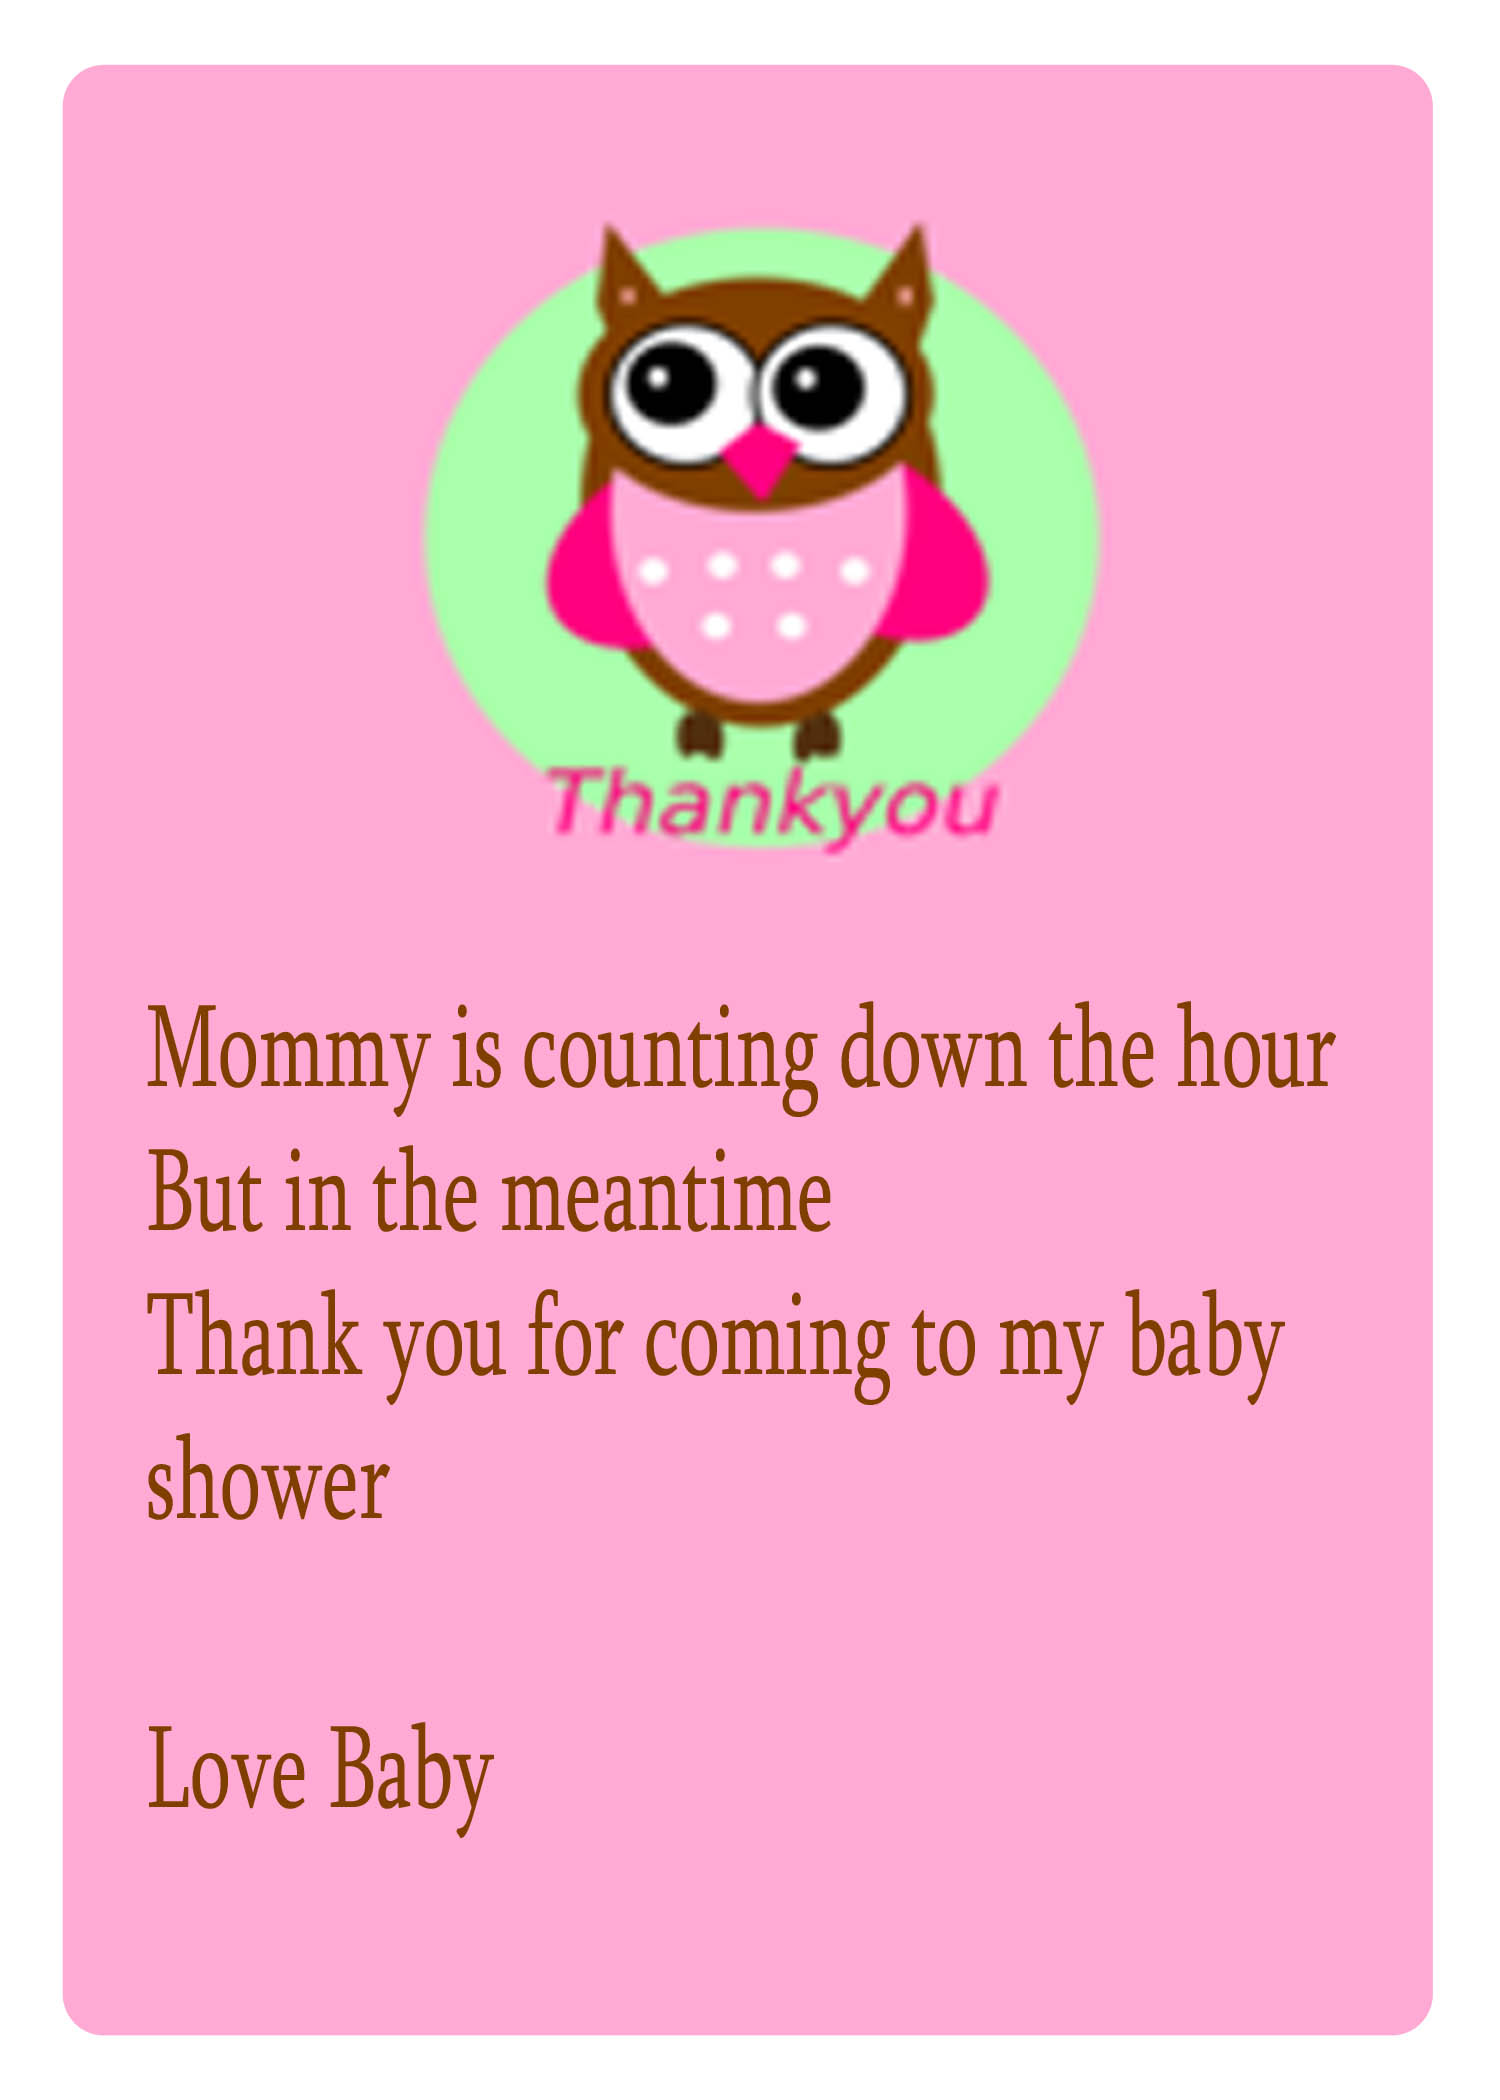 Full Size of Baby Shower:72+ Rousing Baby Shower Thank You Cards Picture Ideas Baby Shower Cake Ideas Baby Shower Decorations Baby Shower Tableware Juegos Para Baby Shower